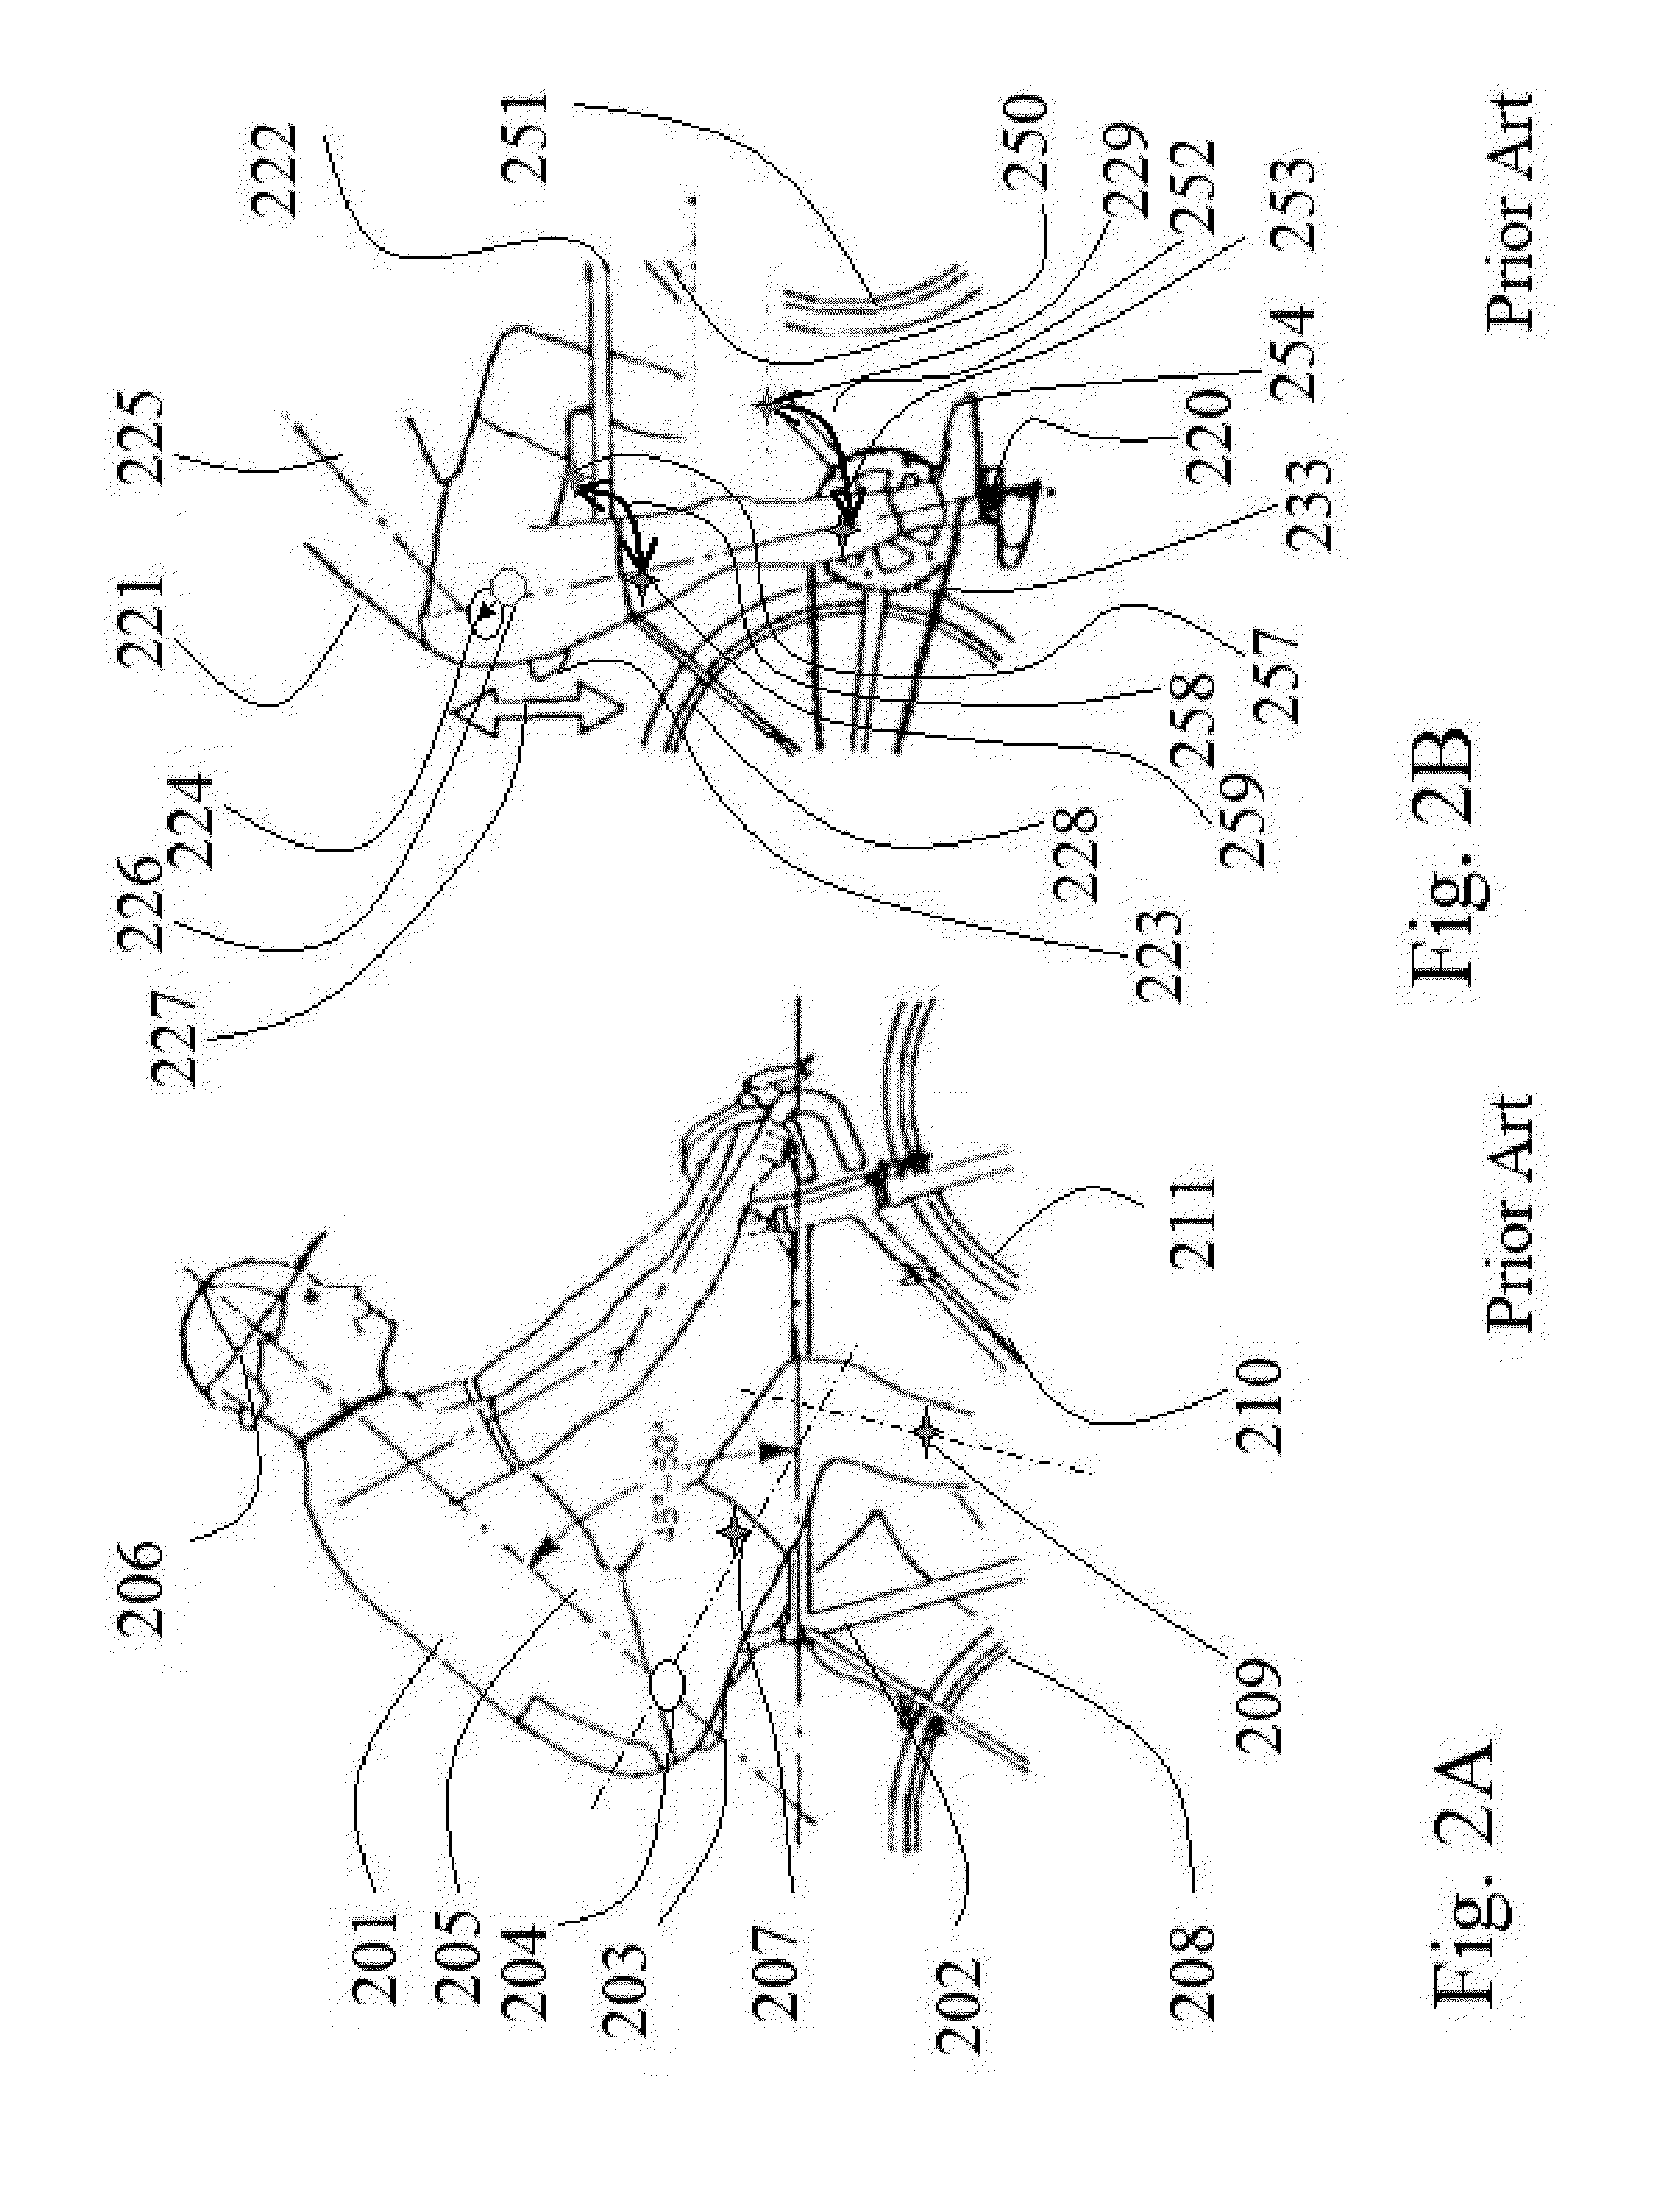 Method and accessories to enhance riding experience on vehicles with human propulsion